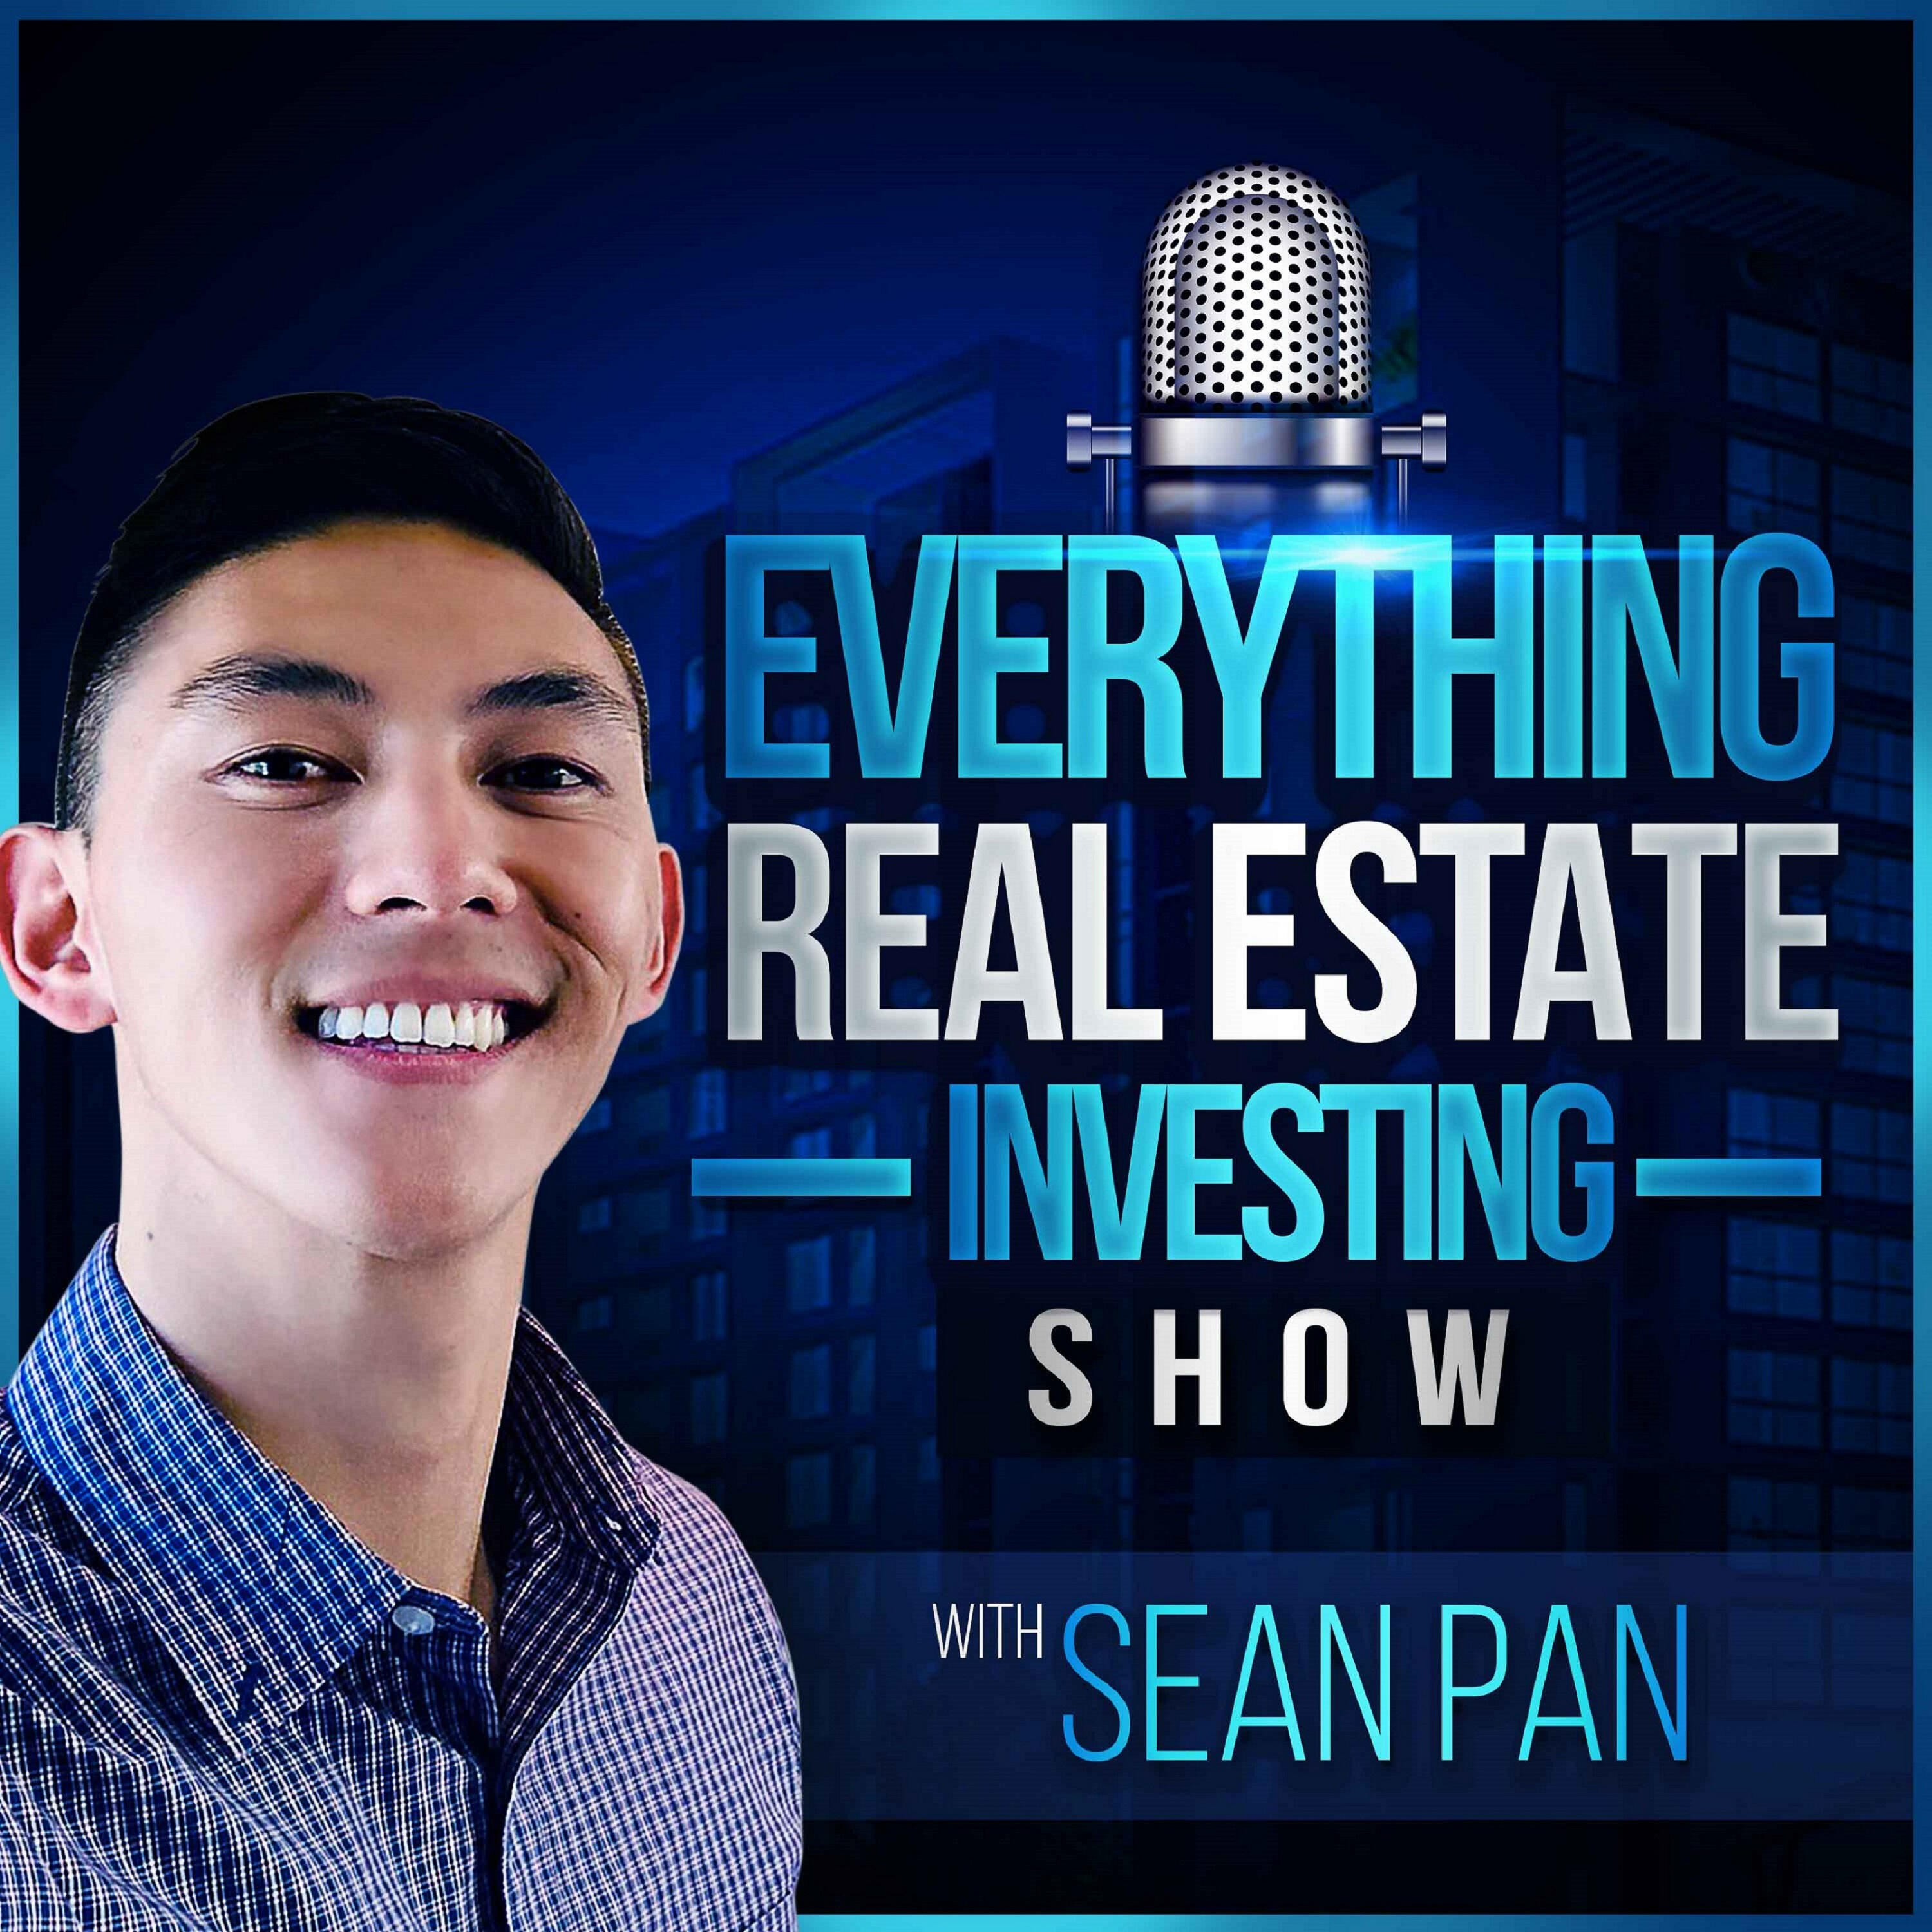 Real everything. Jay Chang. The property Investor show выставка.